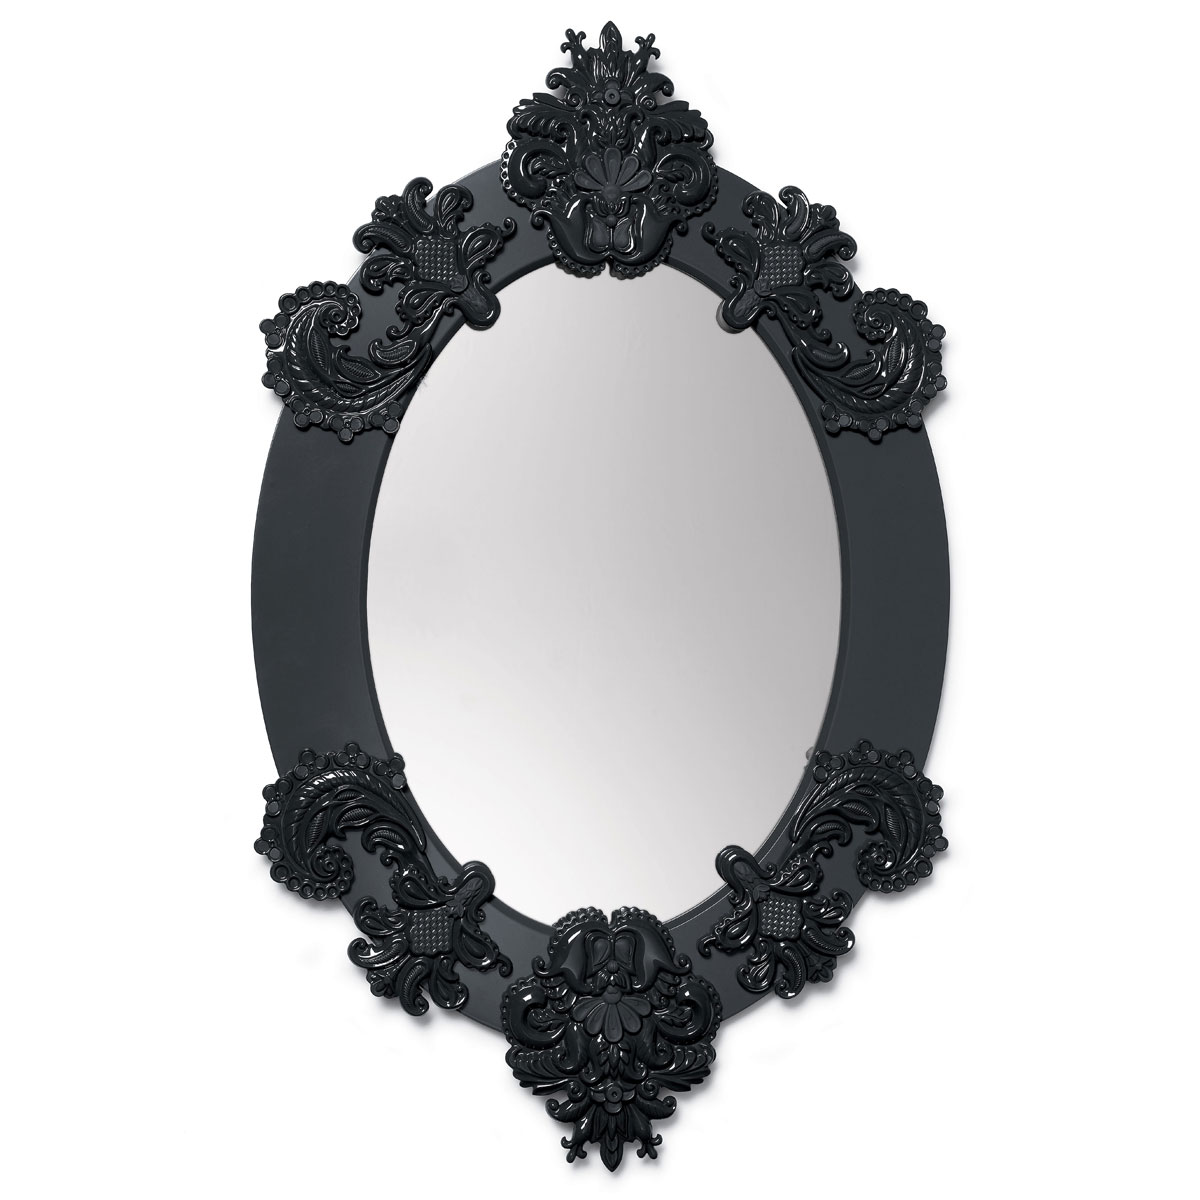 Lladro Home Accessories, Oval Wall Mirror. Black. Limited Edition